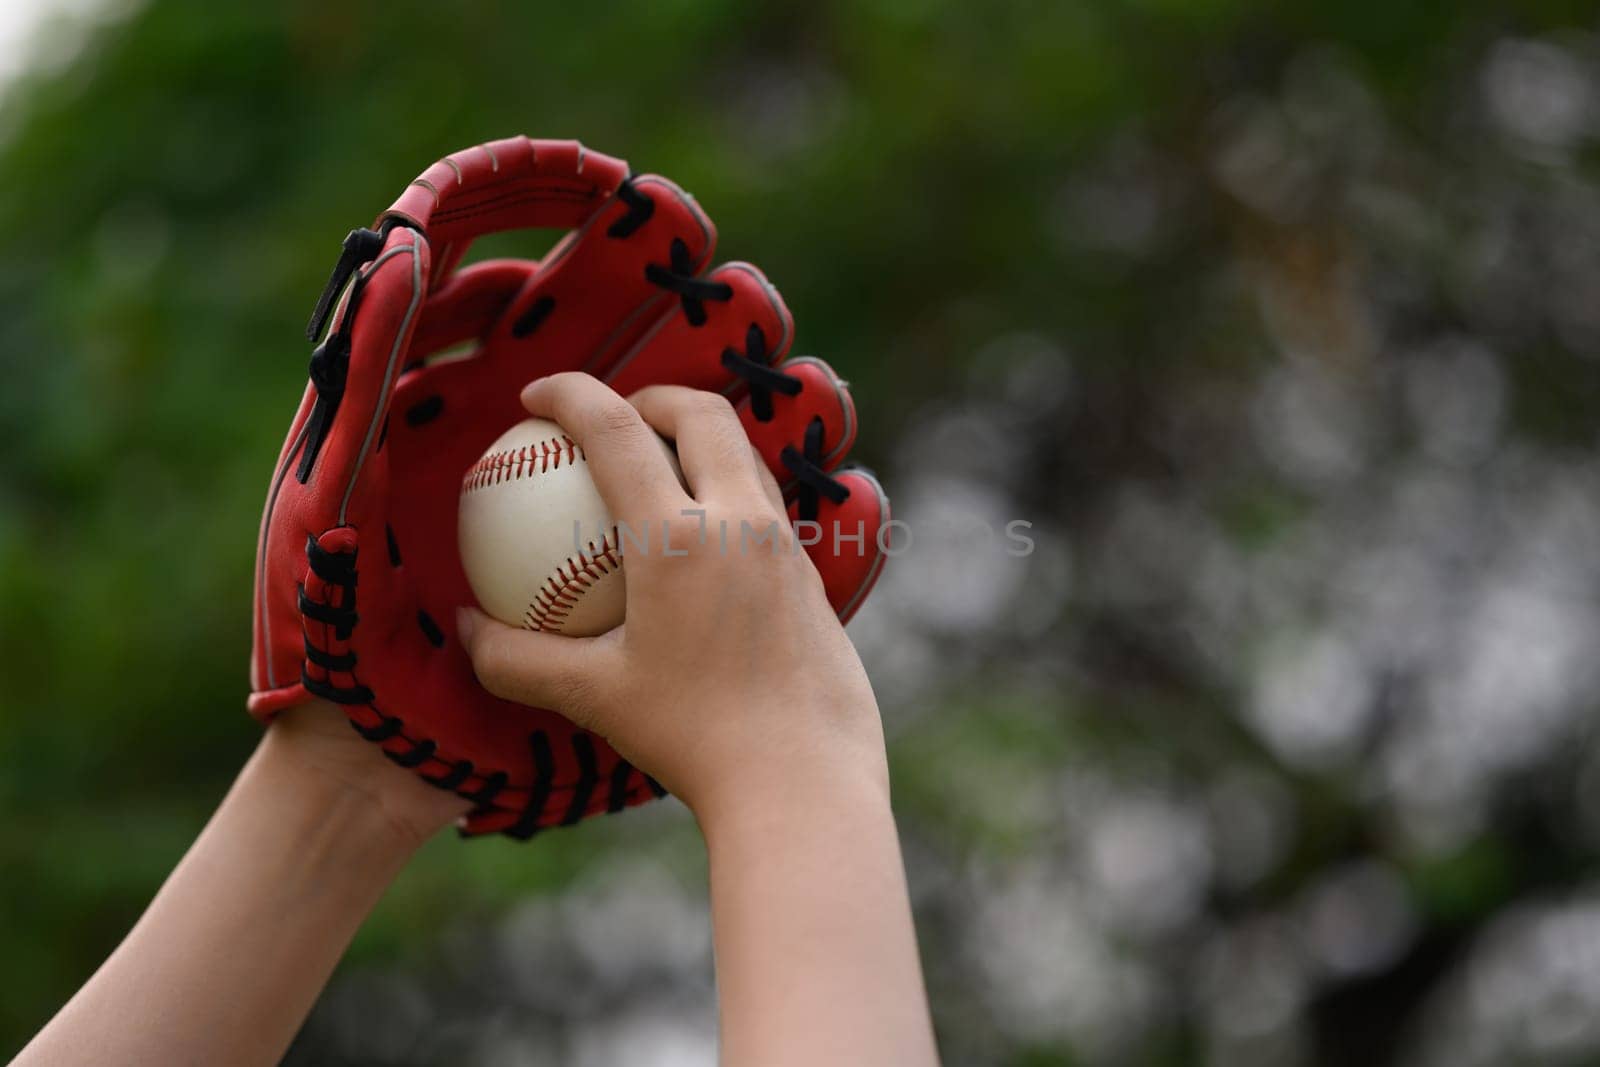 Hand of baseball player in a leather glove holding ball on blurred green background.